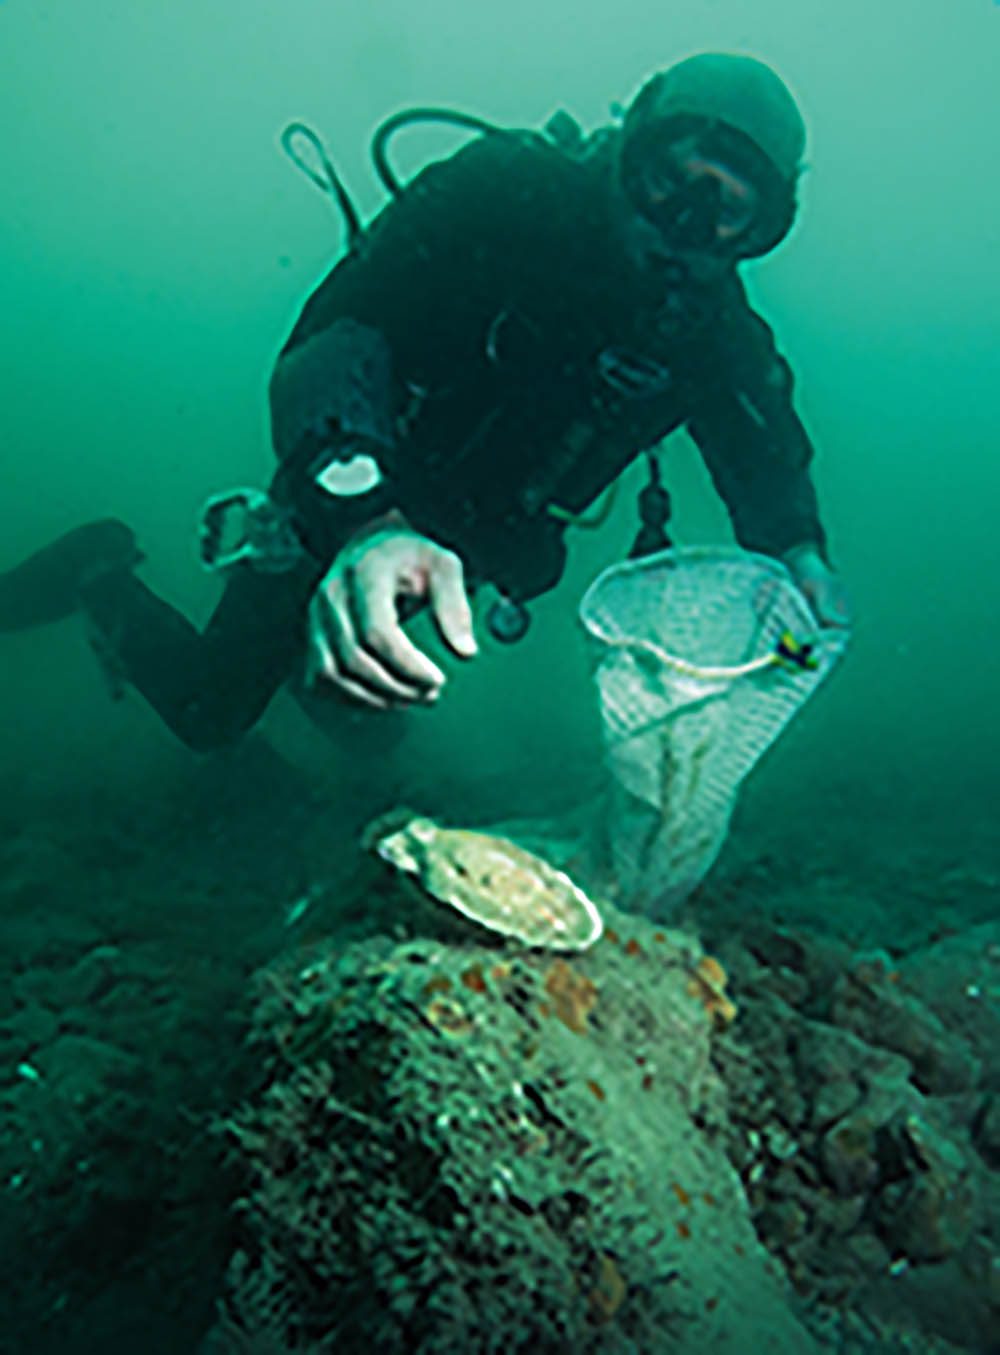 Collecting scallops by hand causes minimum damage to the environment.